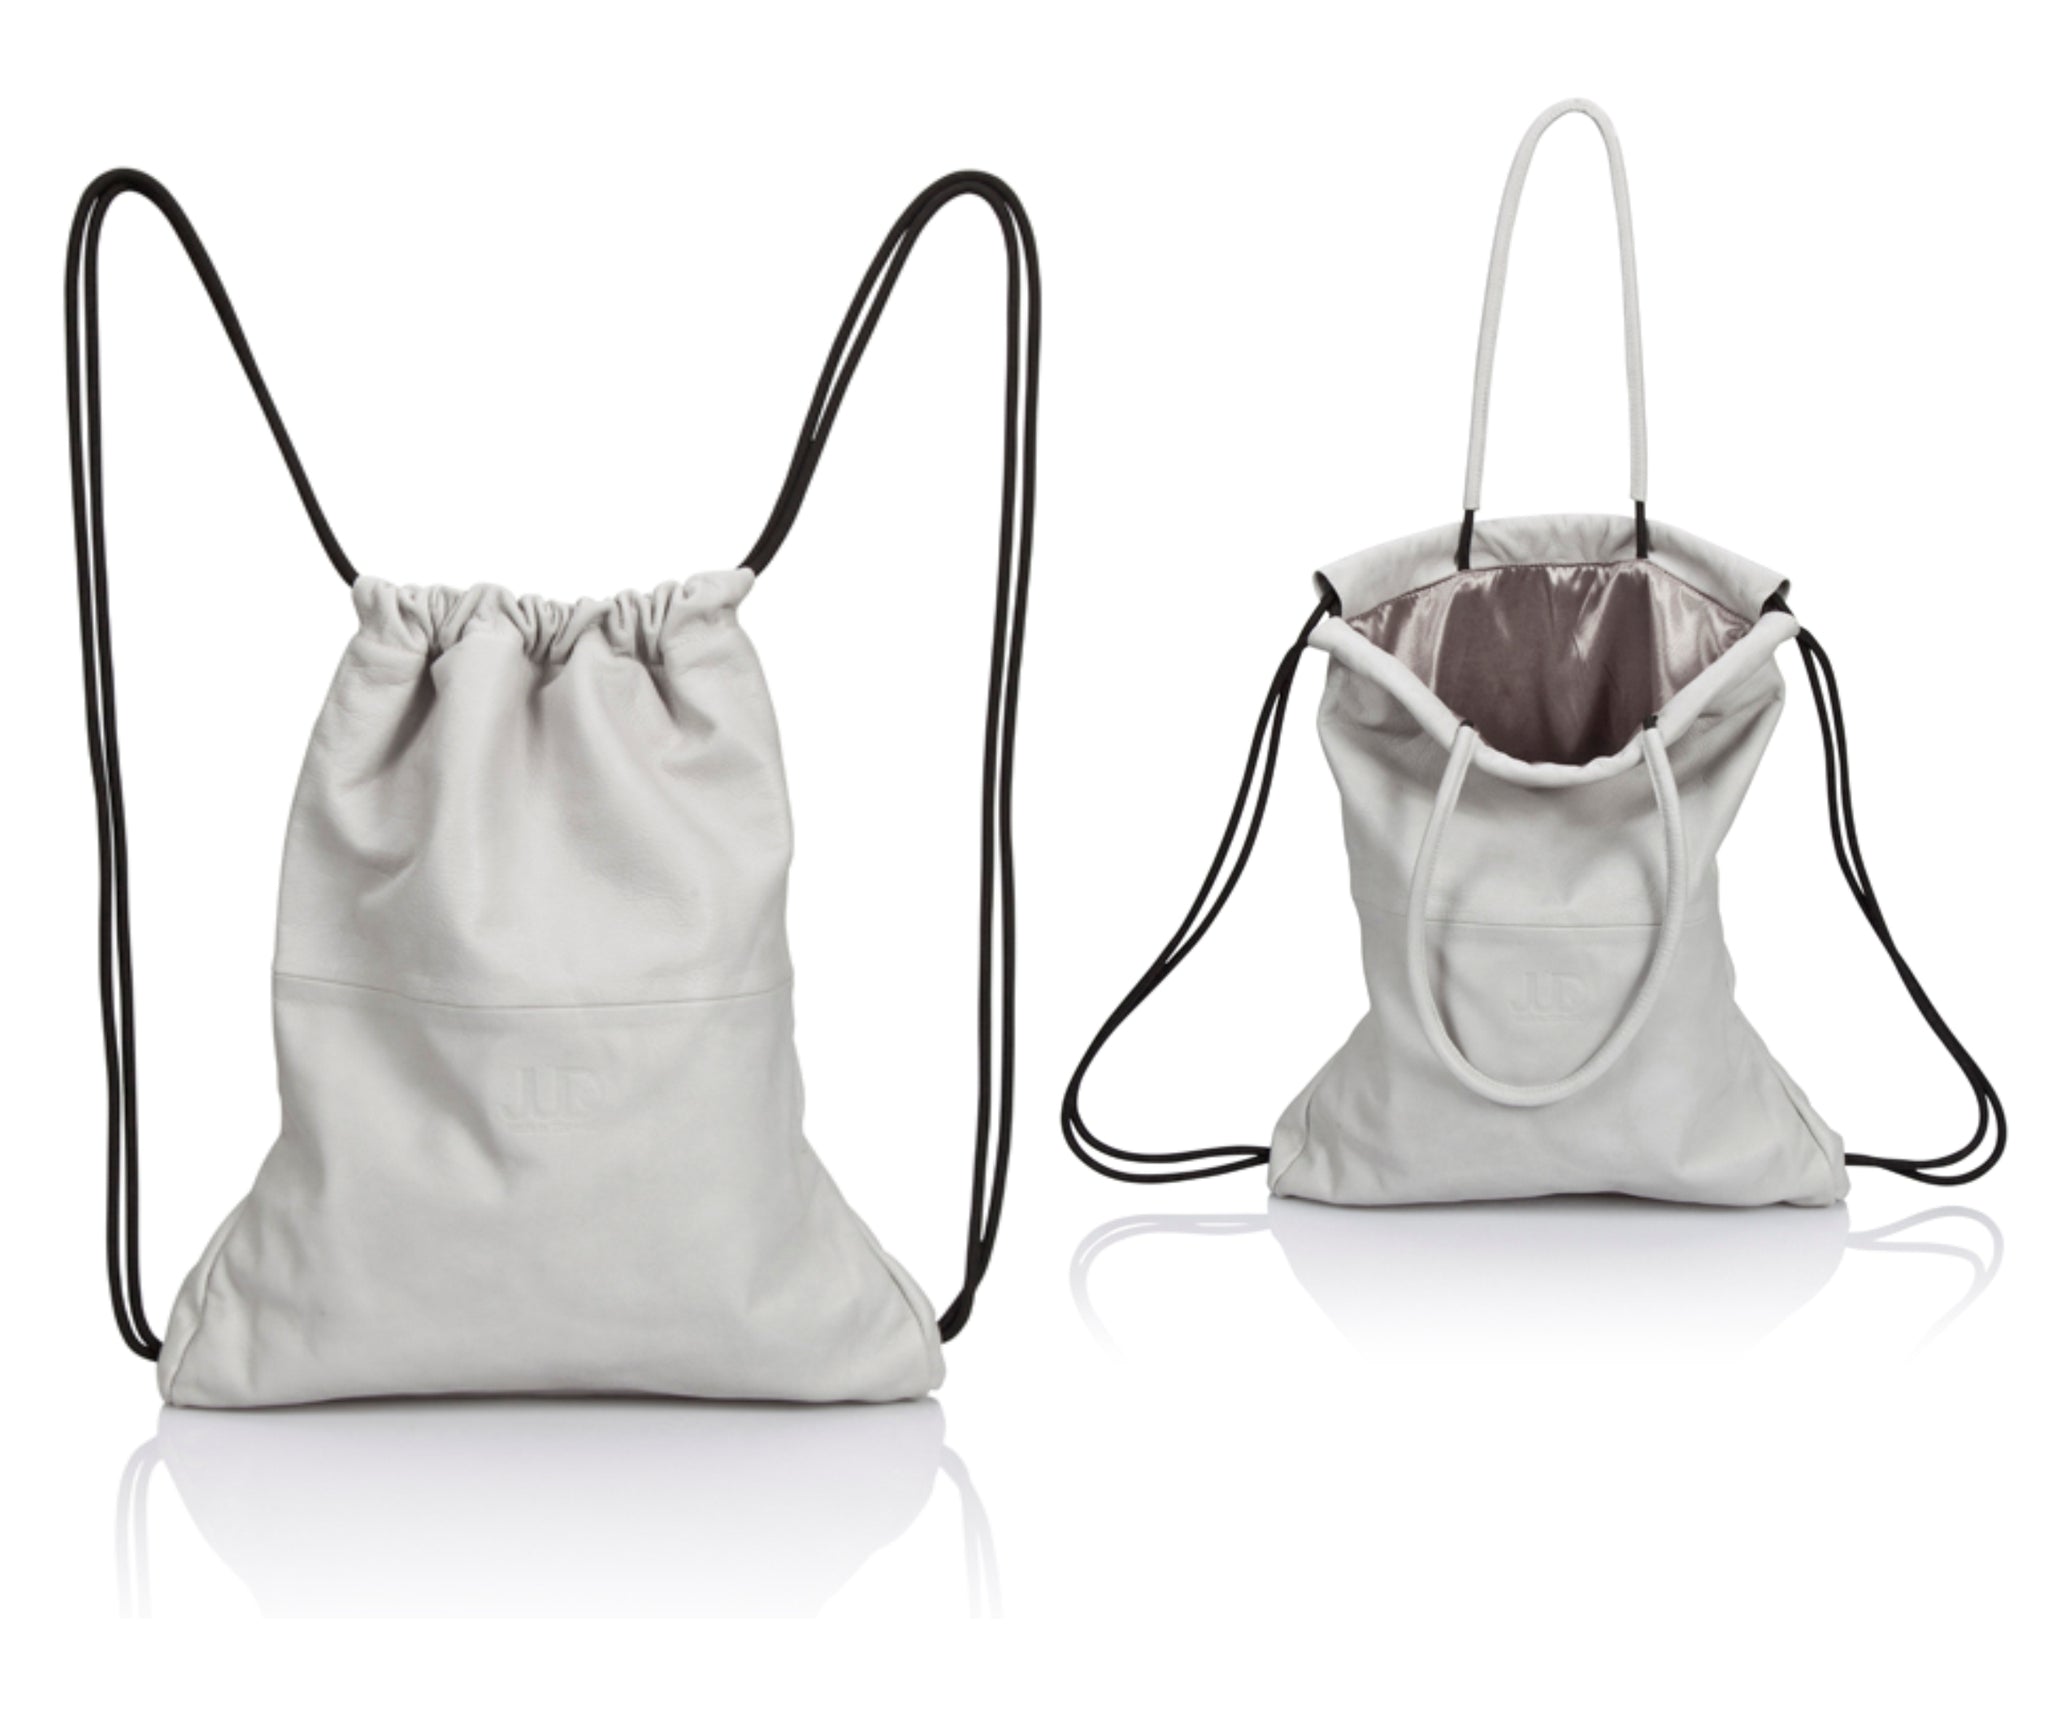 White multi-way leather drawstring backpack crafted with soft Italian Napa leather, adjustable back straps, and leather-covered inner top handles. This style is versatile and can be carried as a backpack, tote, or on the shoulder. Its ideal minimalist design is suitable for long active days & use. Suitable for laptops up to 15inch.